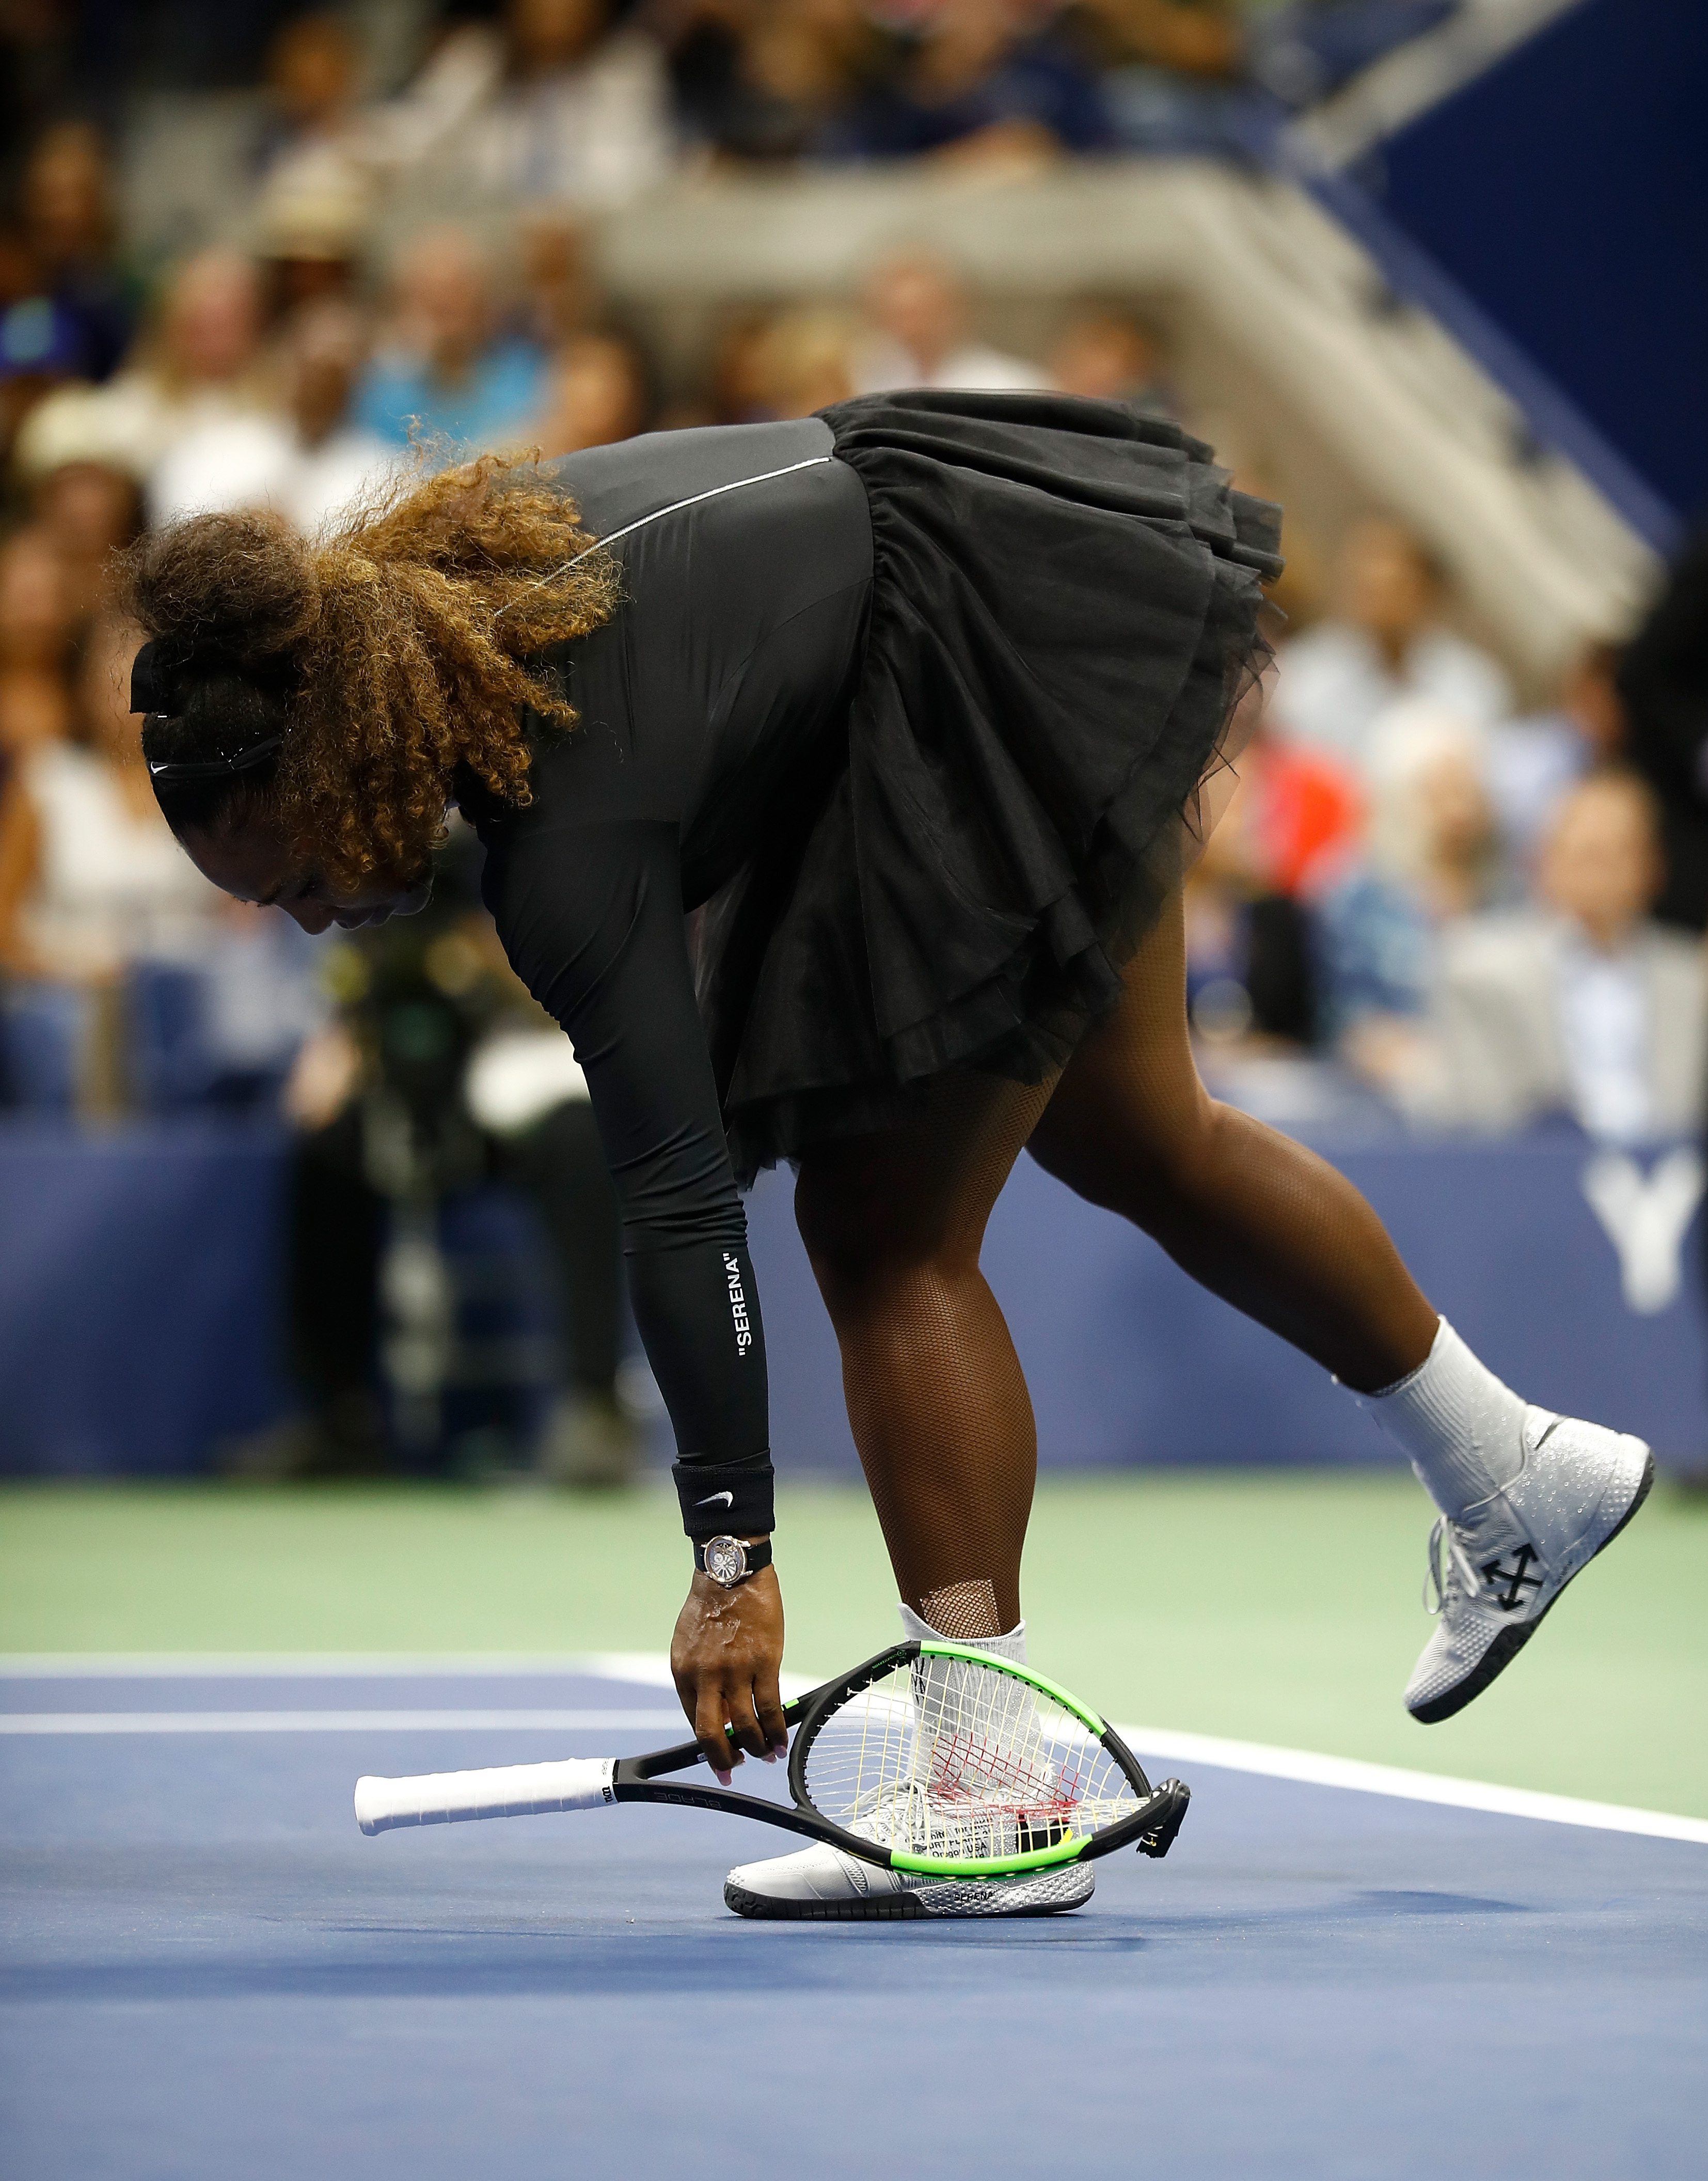 NEW YORK, NY - SEPTEMBER 08: Serena Williams of the United States throws her racket to the ground in frustration in the Women's Singles finals match against Naomi Osaka of Japan on Day Thirteen of the 2018 US Open at the USTA Billie Jean King National Tennis Center on September 8, 2018 in the Flushing neighborhood of the Queens borough of New York City. (Photo by Julian Finney/Getty Images)